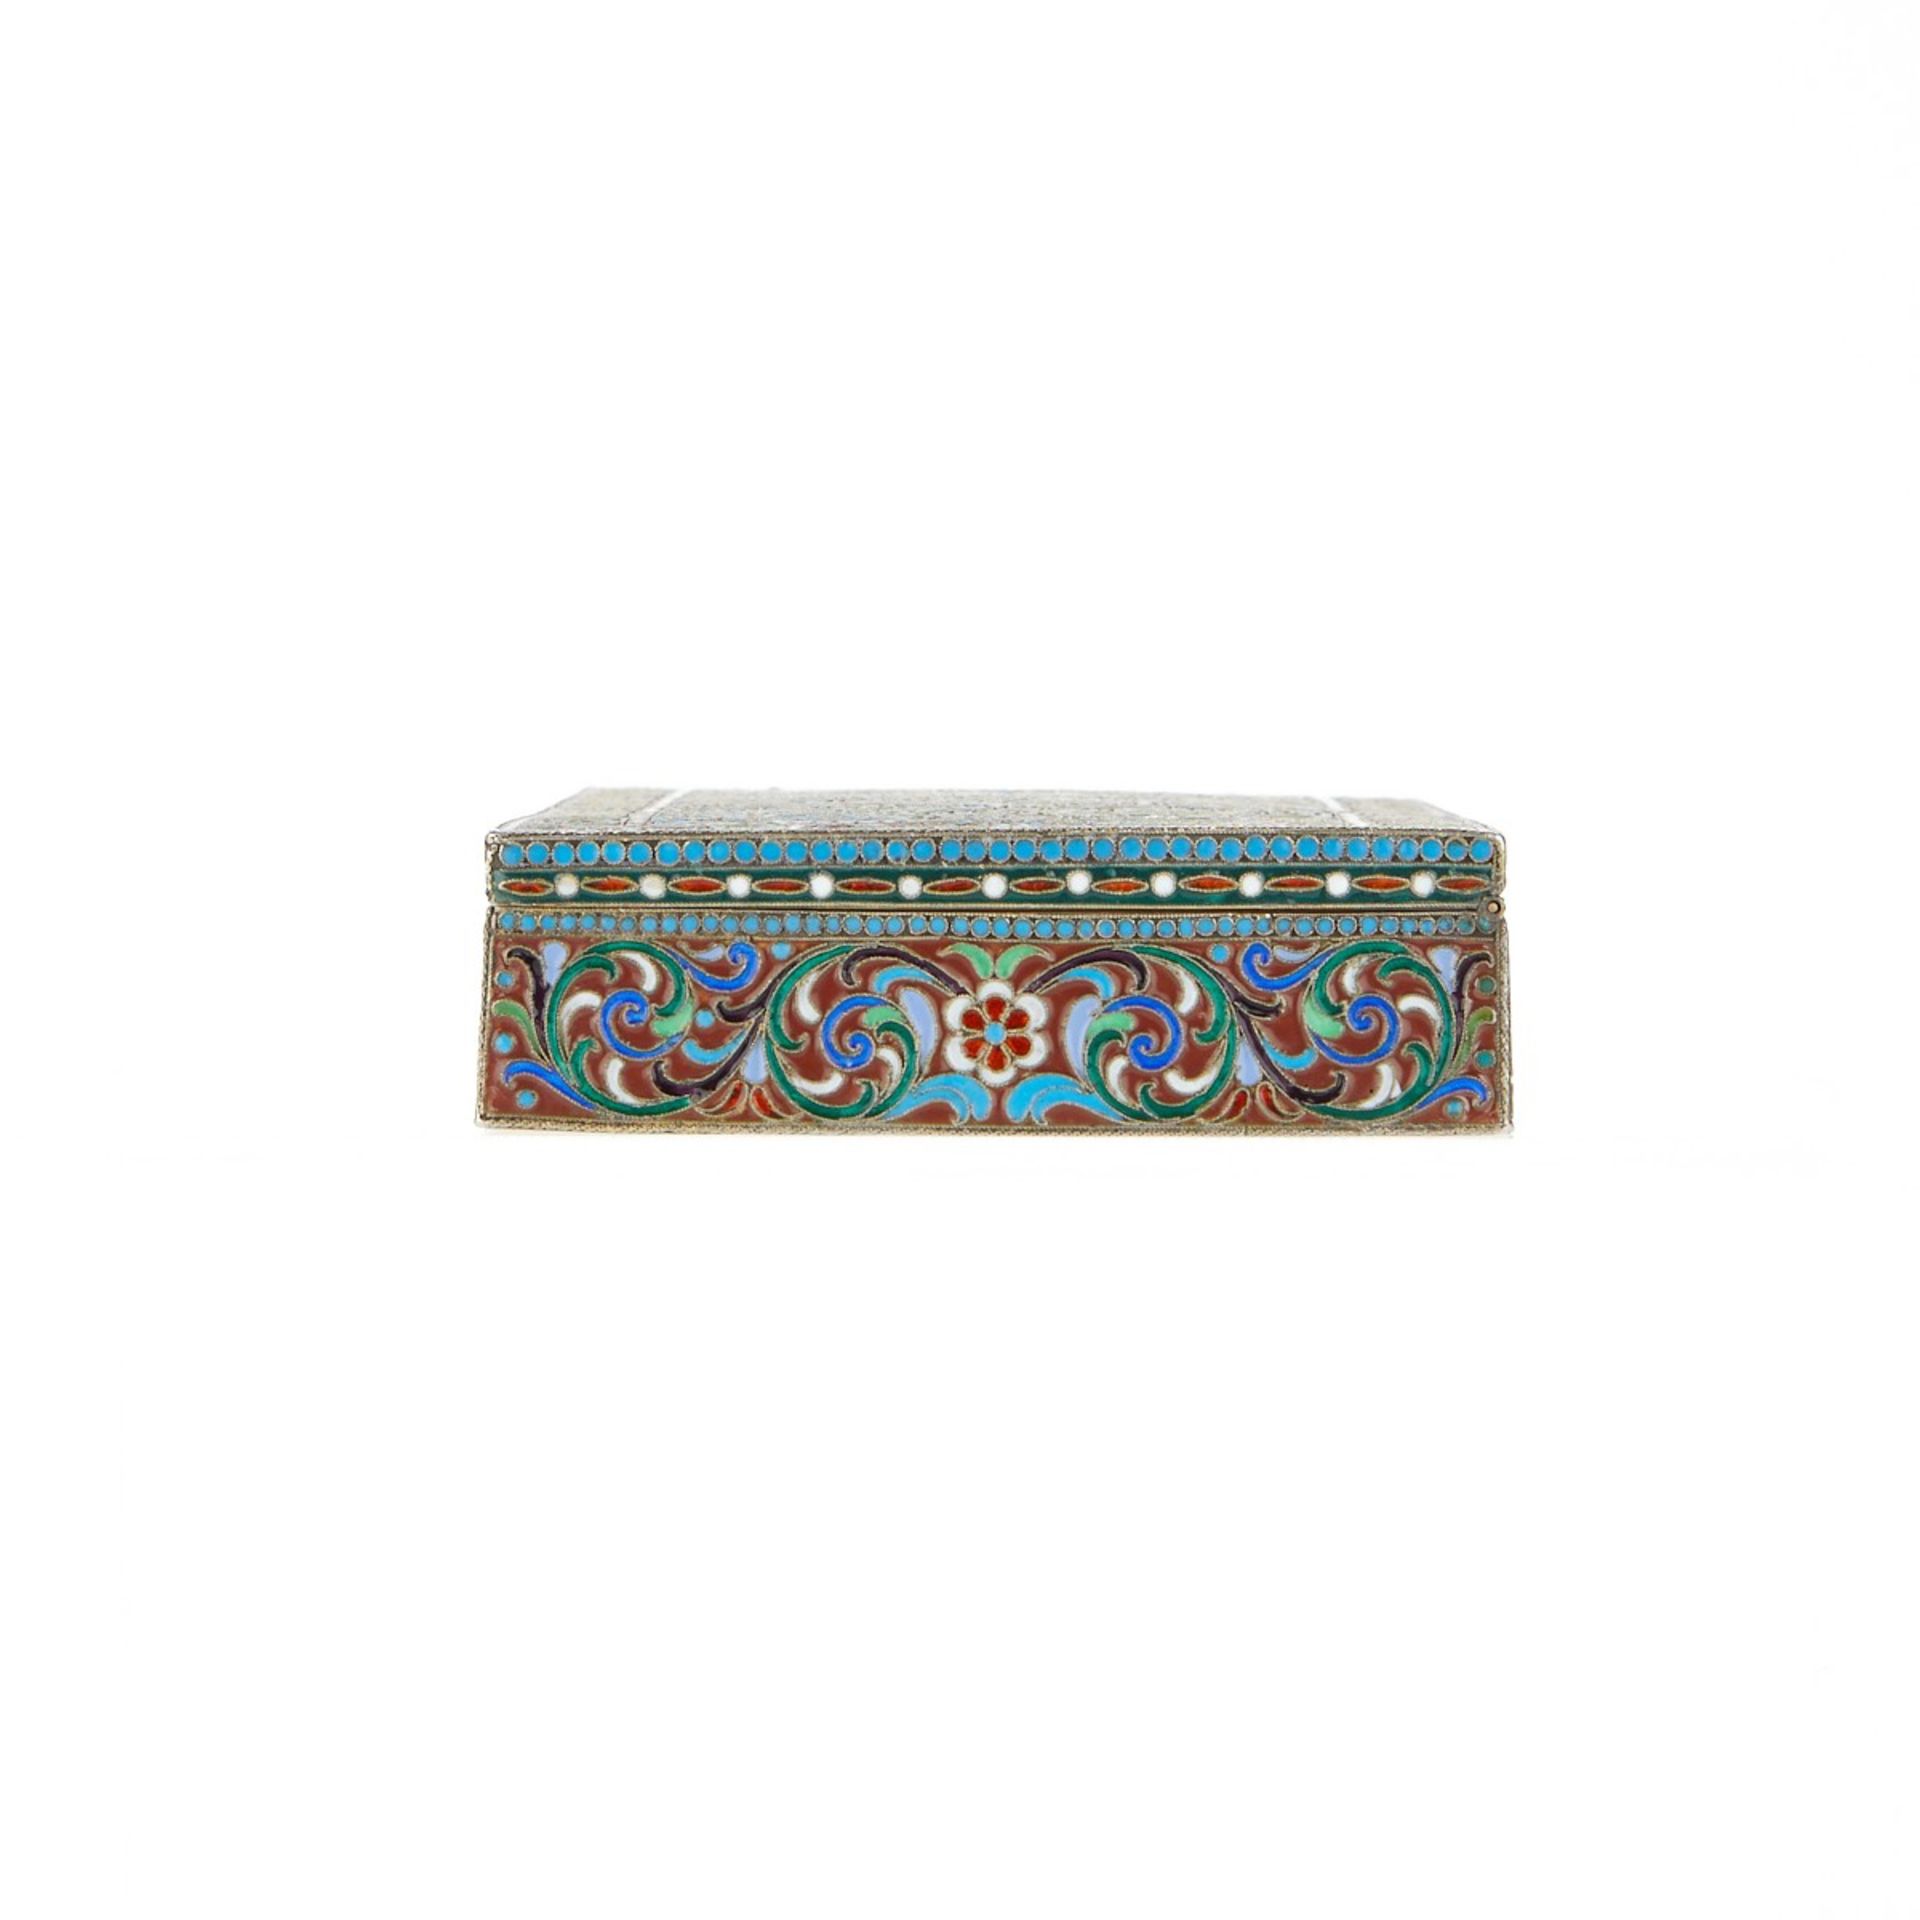 Russian Enameled Silver Tabletop Cigarette Box - Image 6 of 17